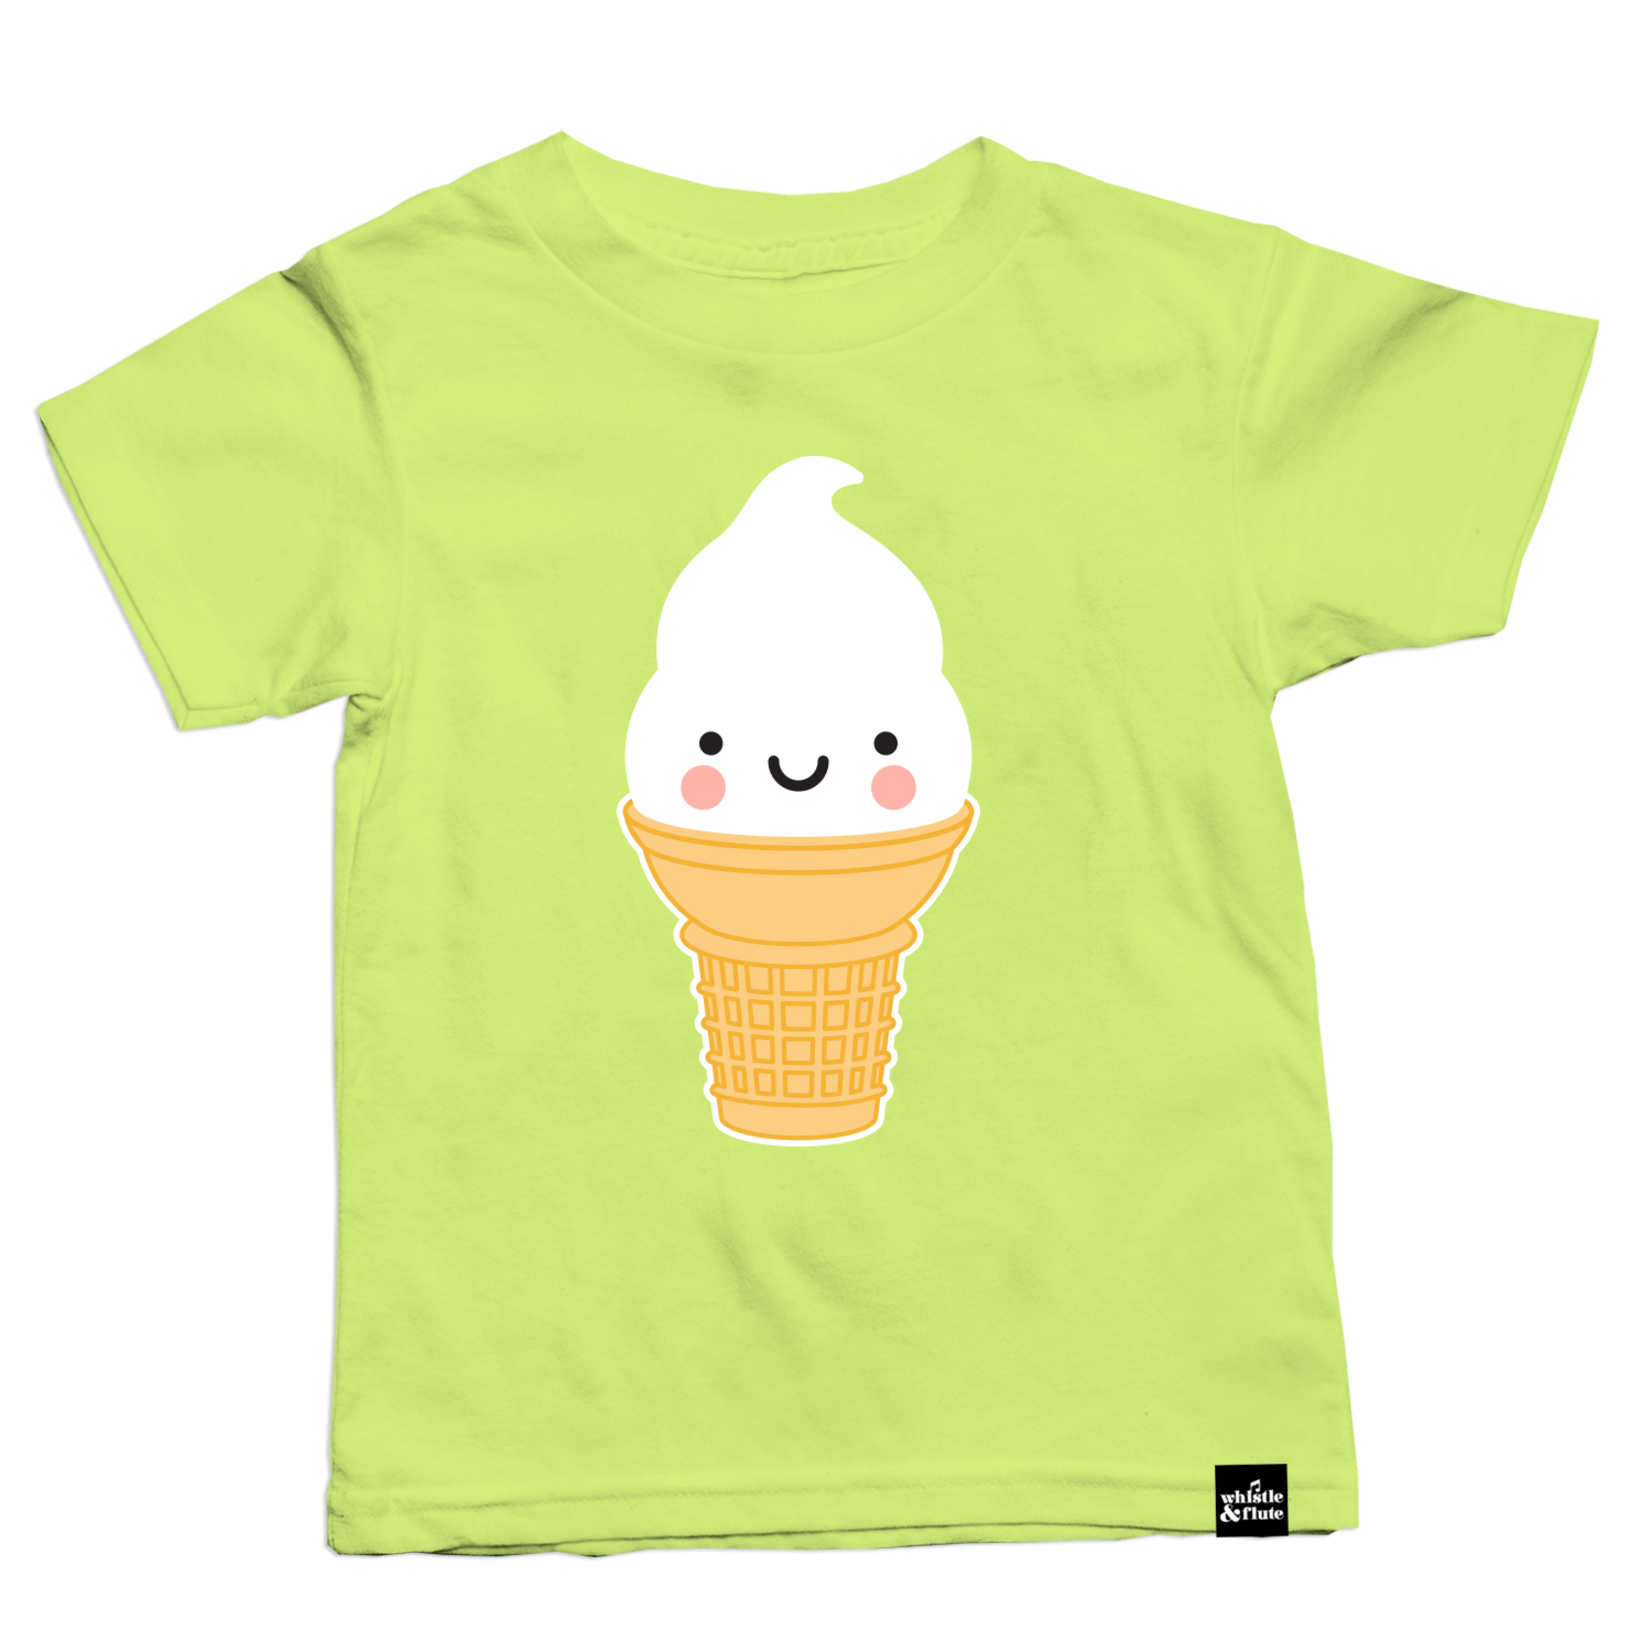 Whistle & Flute WHISTLE AND FLUTE - Neon green shortsleeve t-shirt 'Kawaii - Soft serve'